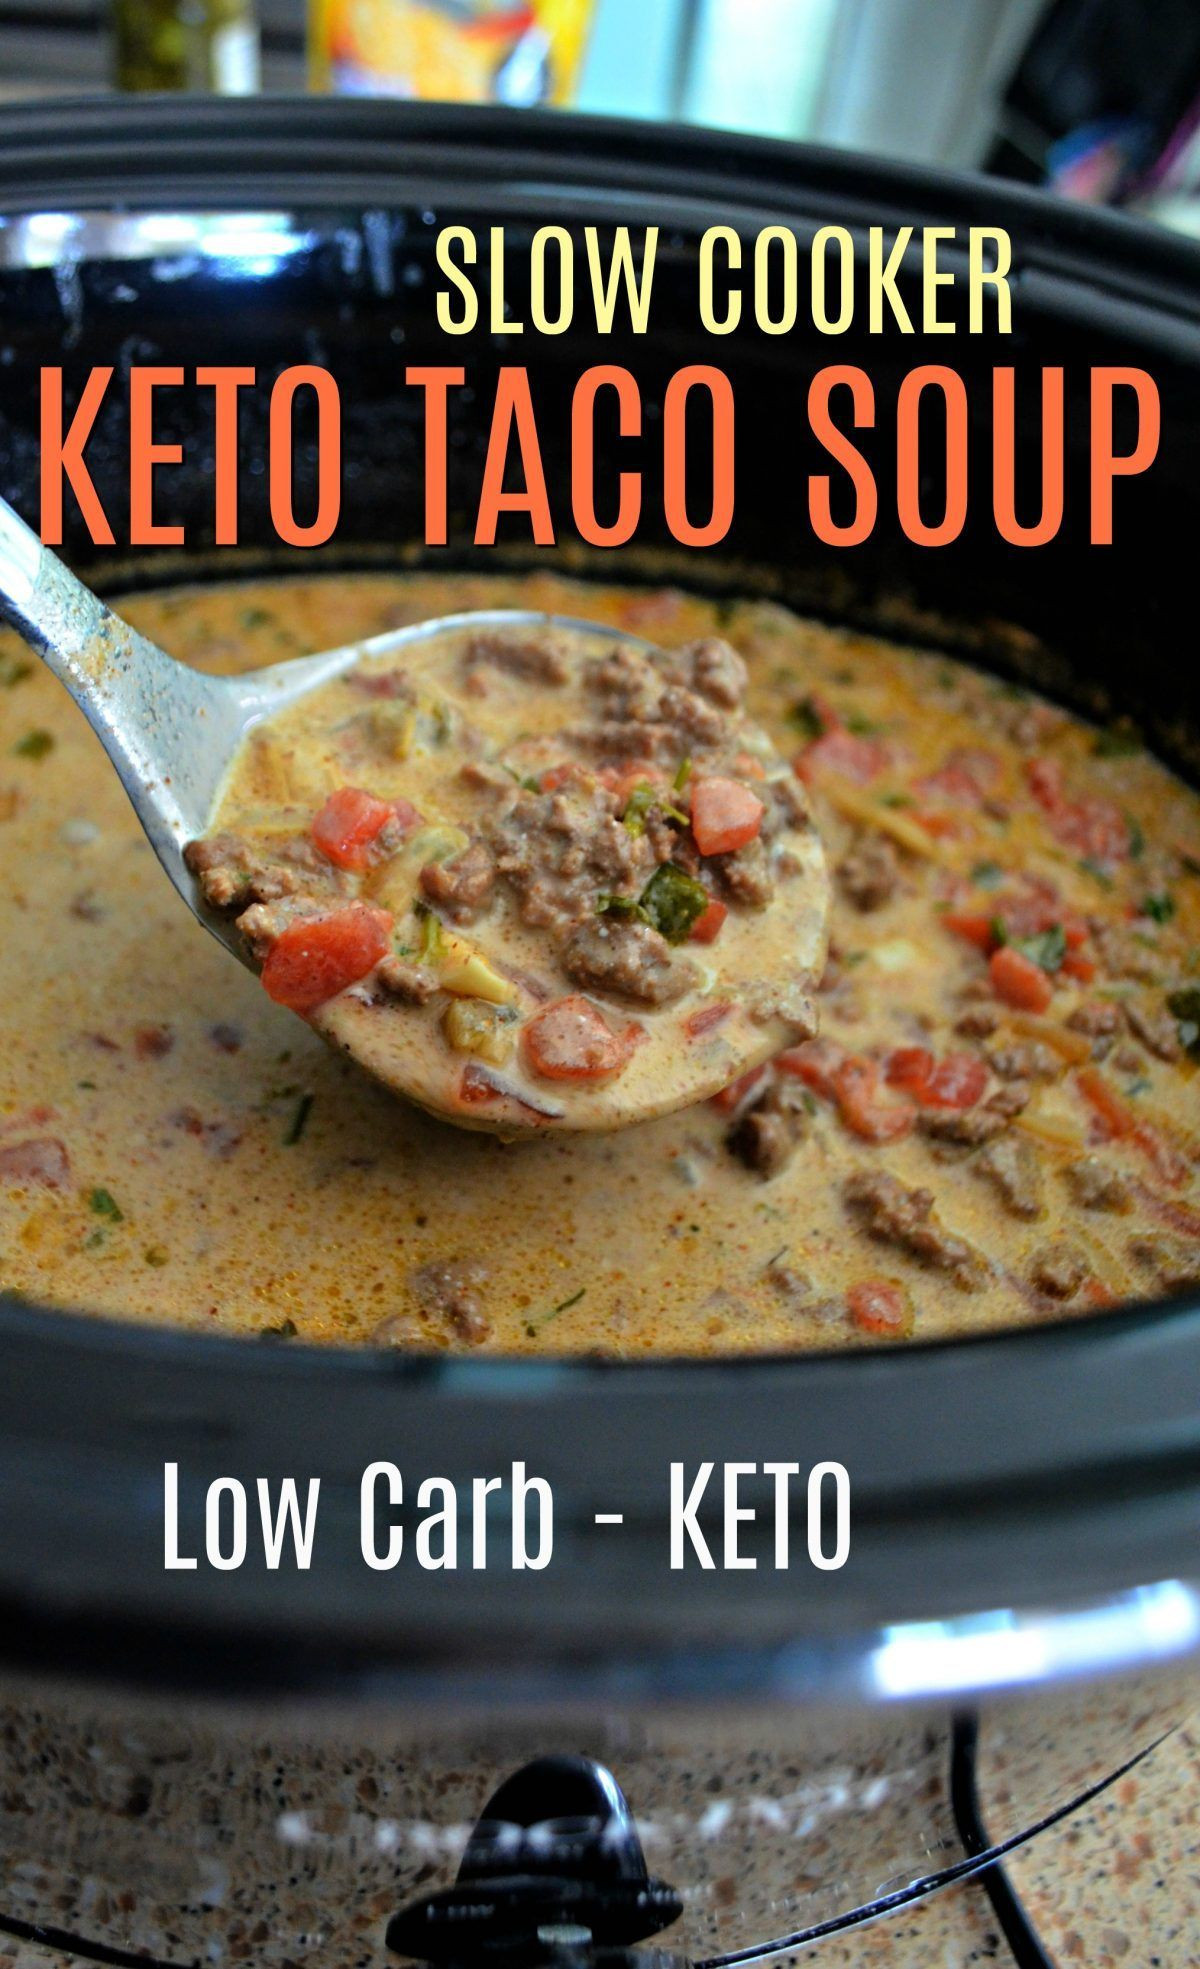 Taco Soup Recipe Crockpot Keto
 Make the BEST Keto Taco Soup in Your Slow Cooker or